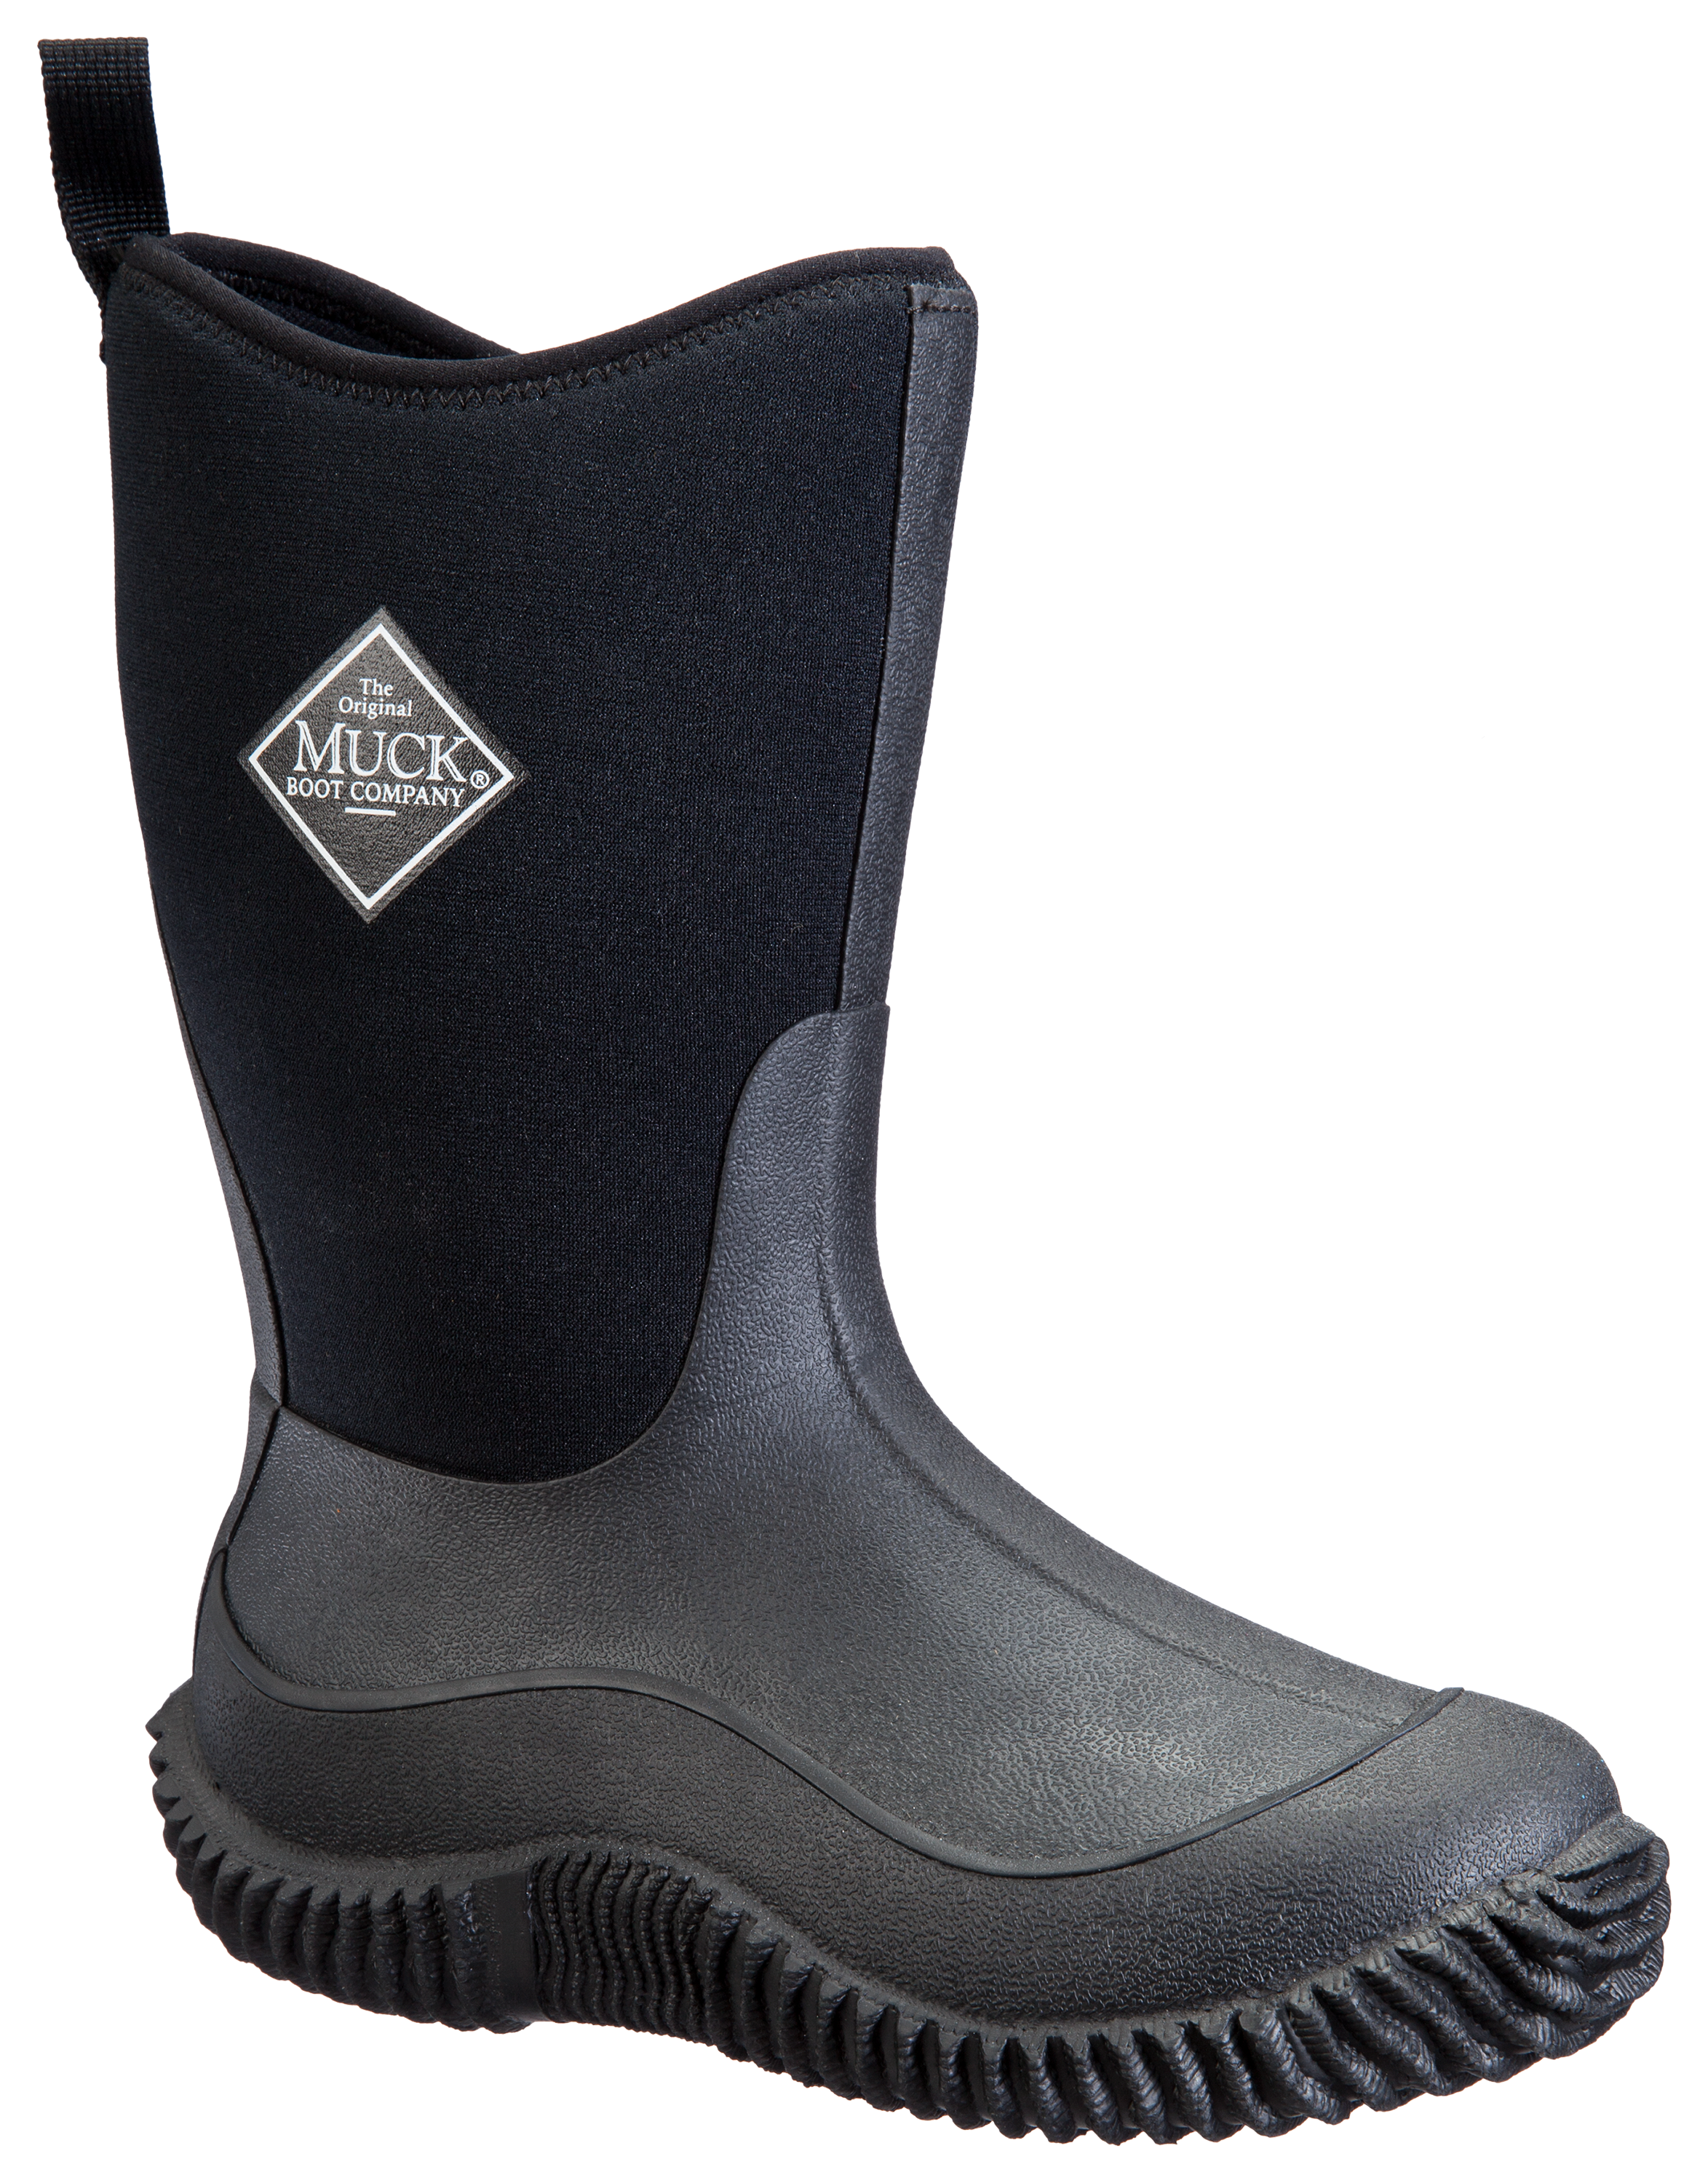 The Original Muck Boot Company Hale Rubber Boots for Kids - Black/Black - 2 Kids